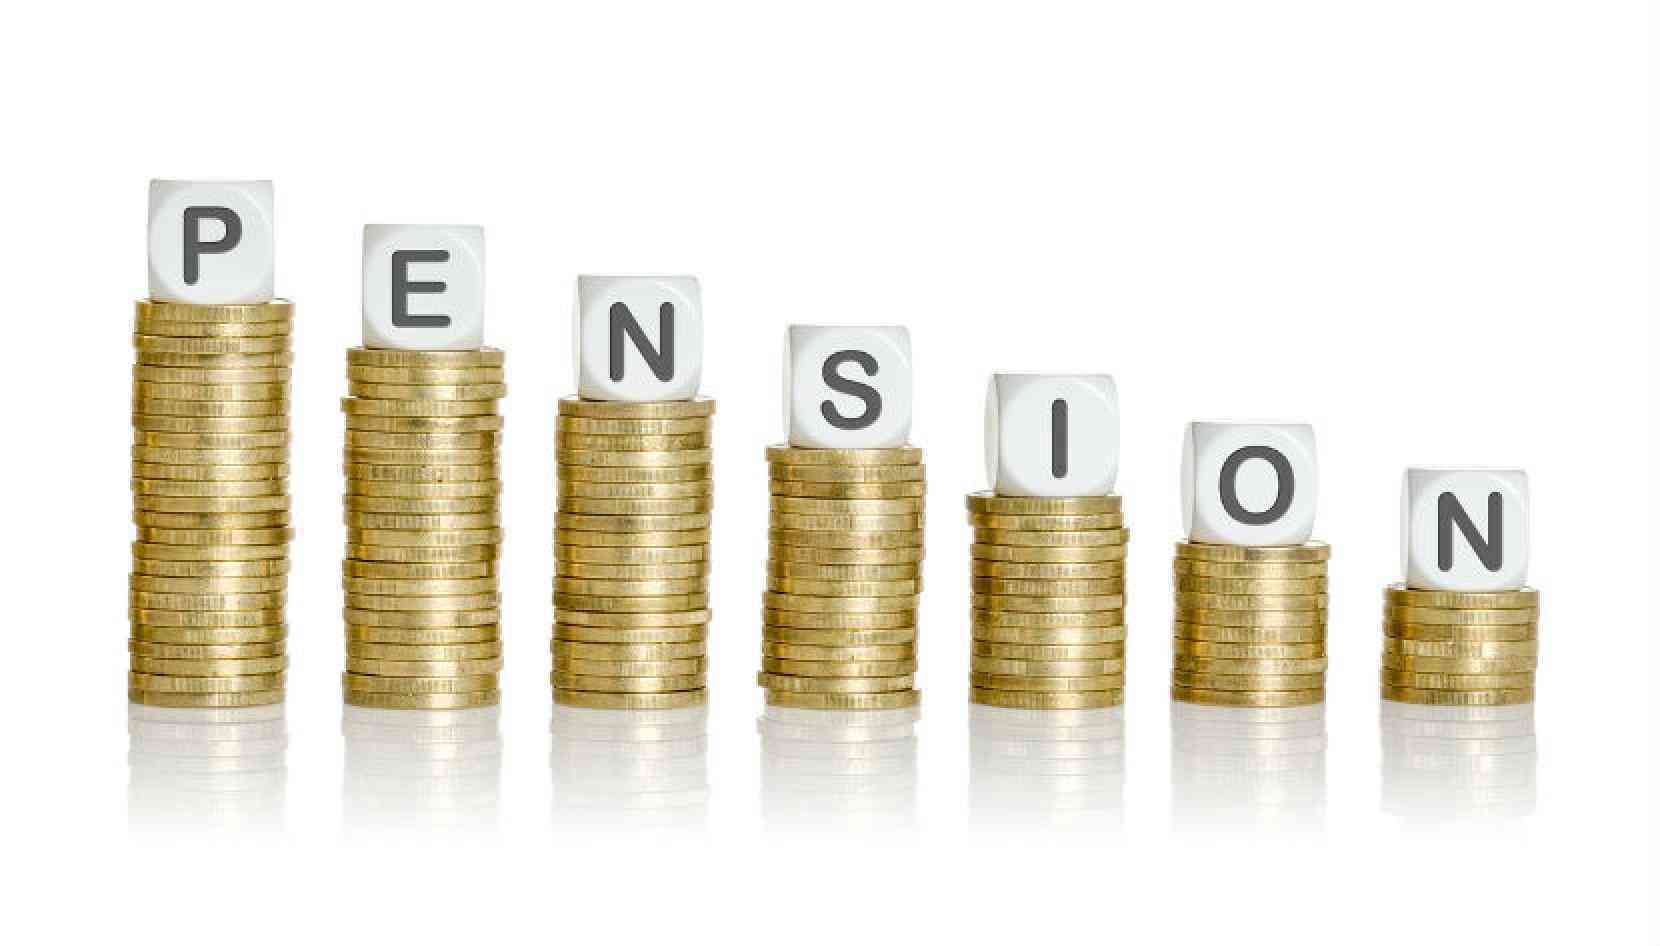 National Pension System,